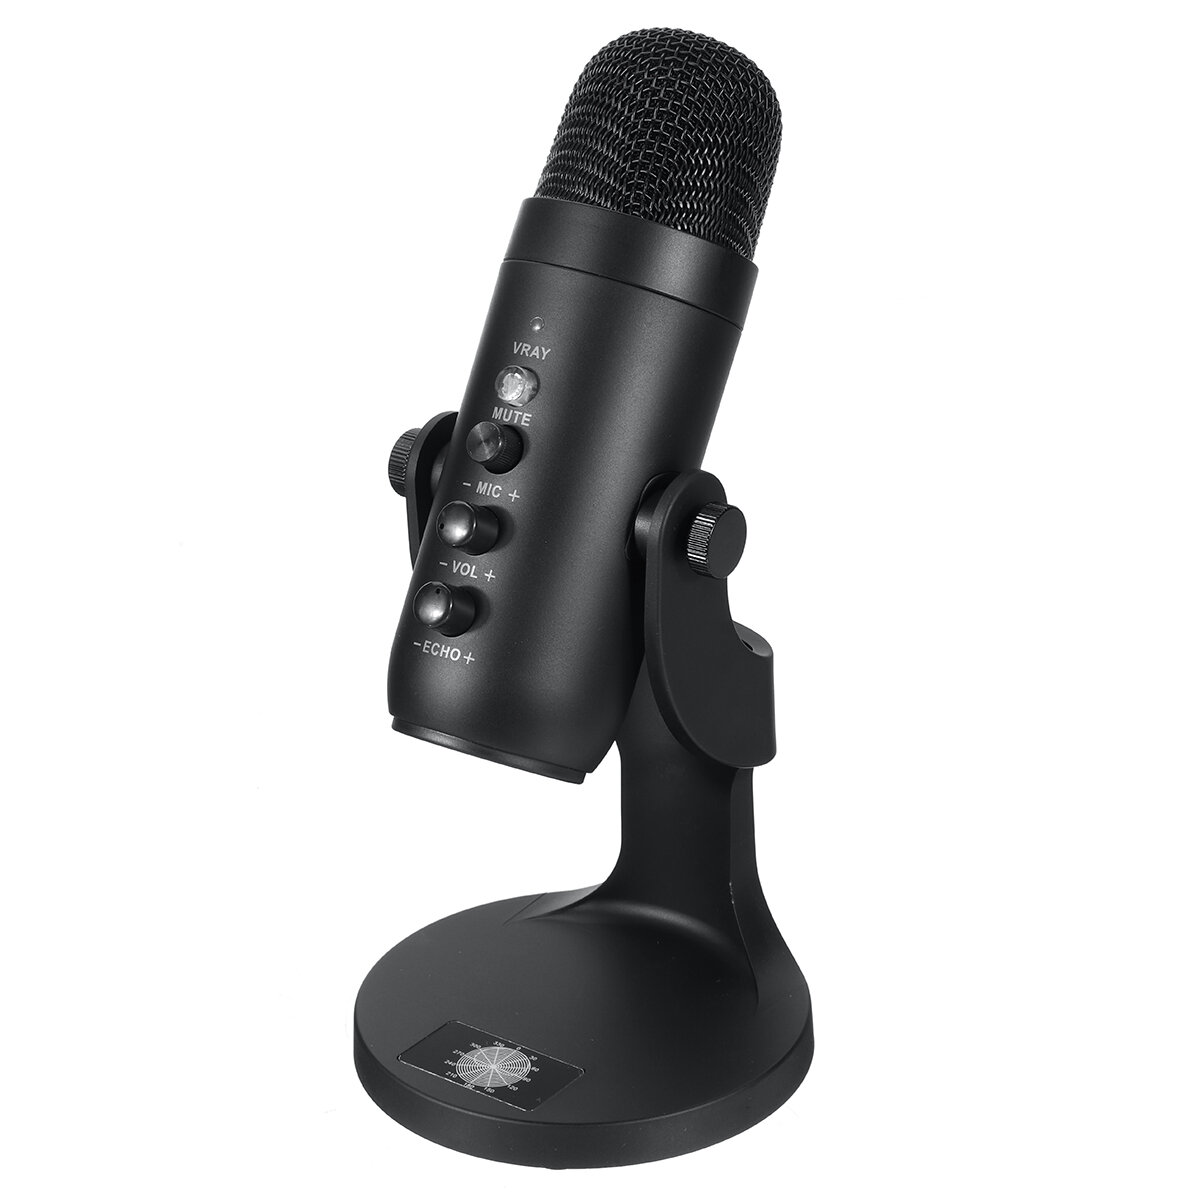 LEORY MU-900 USB Condenser Microphone Stand Gaming Streaming Podcasting Recording for Computer USB PC Headphone